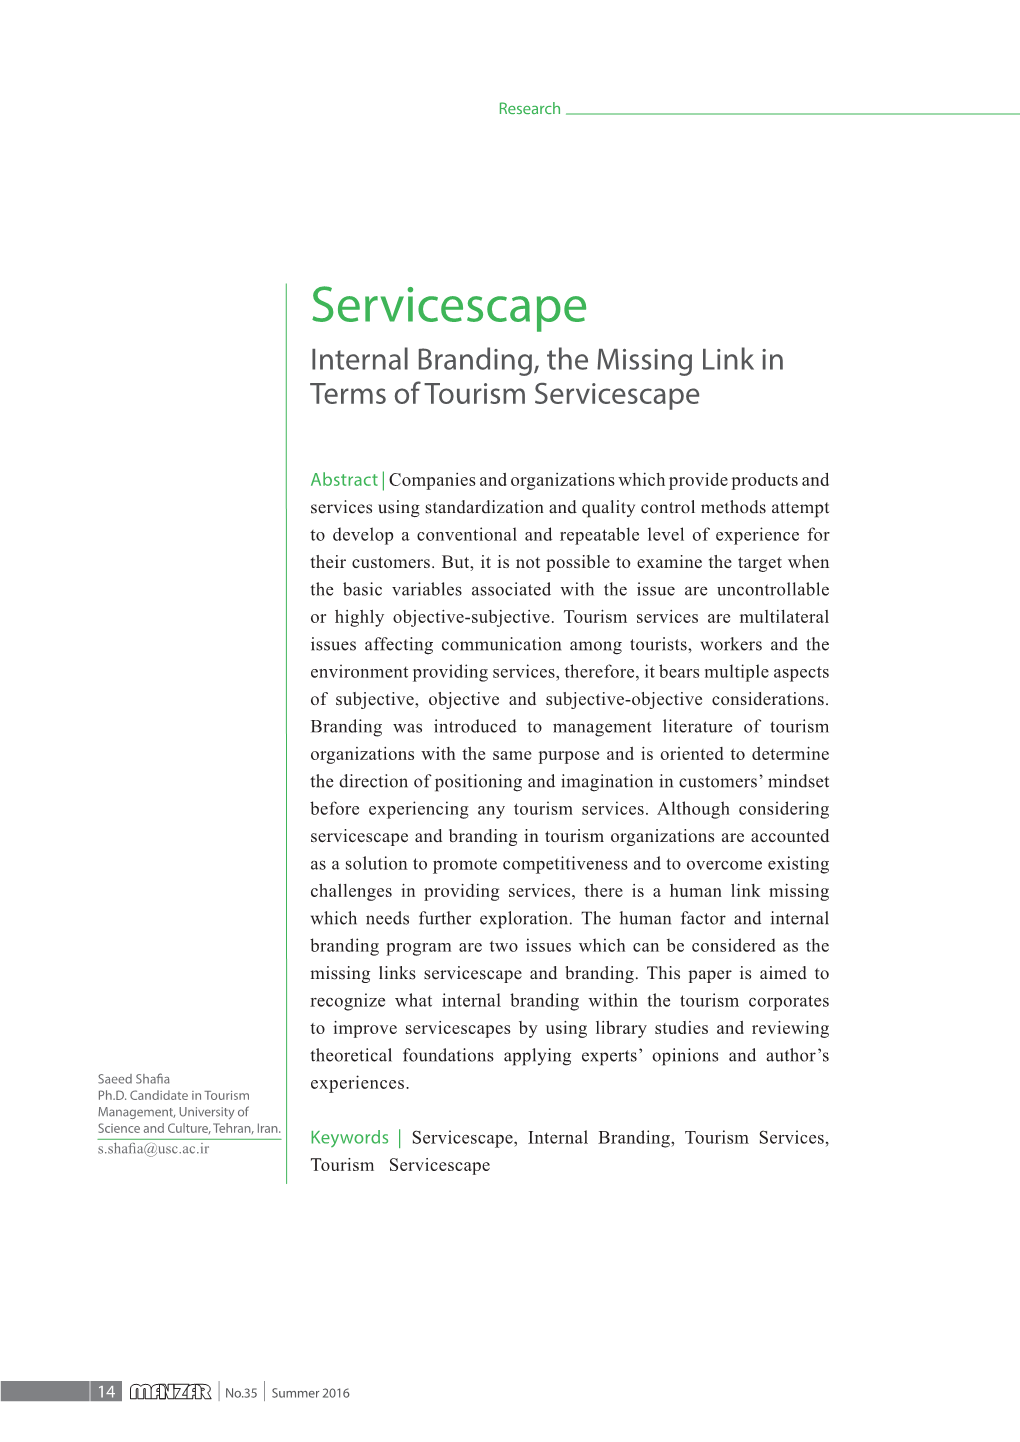 Servicescape Internal Branding, the Missing Link in Terms of Tourism Servicescape